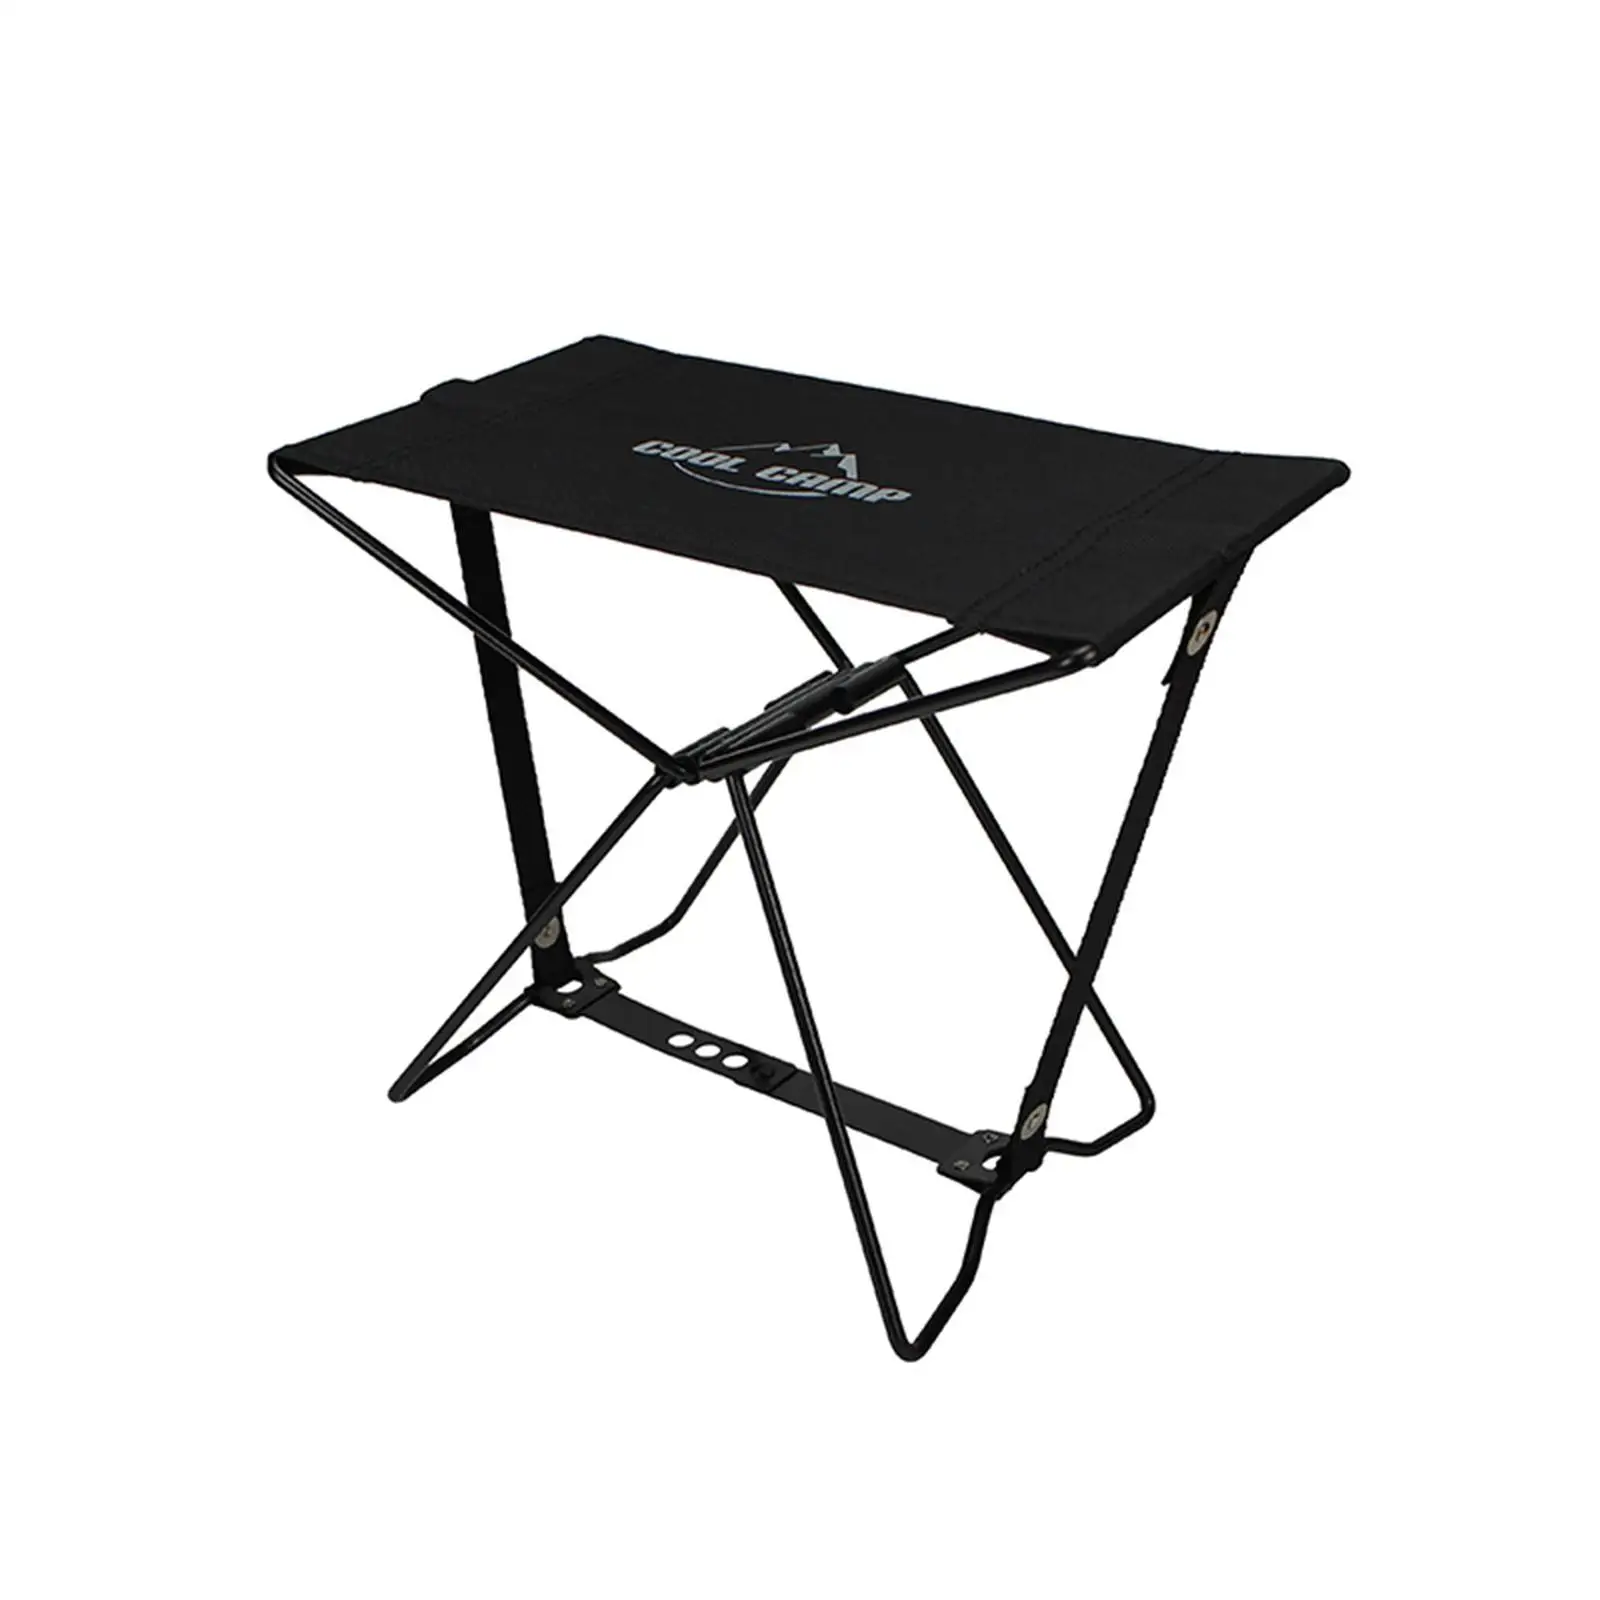 Camping Stool Seat Camp Stool Camping Chair Lightweight Small Folding Chair